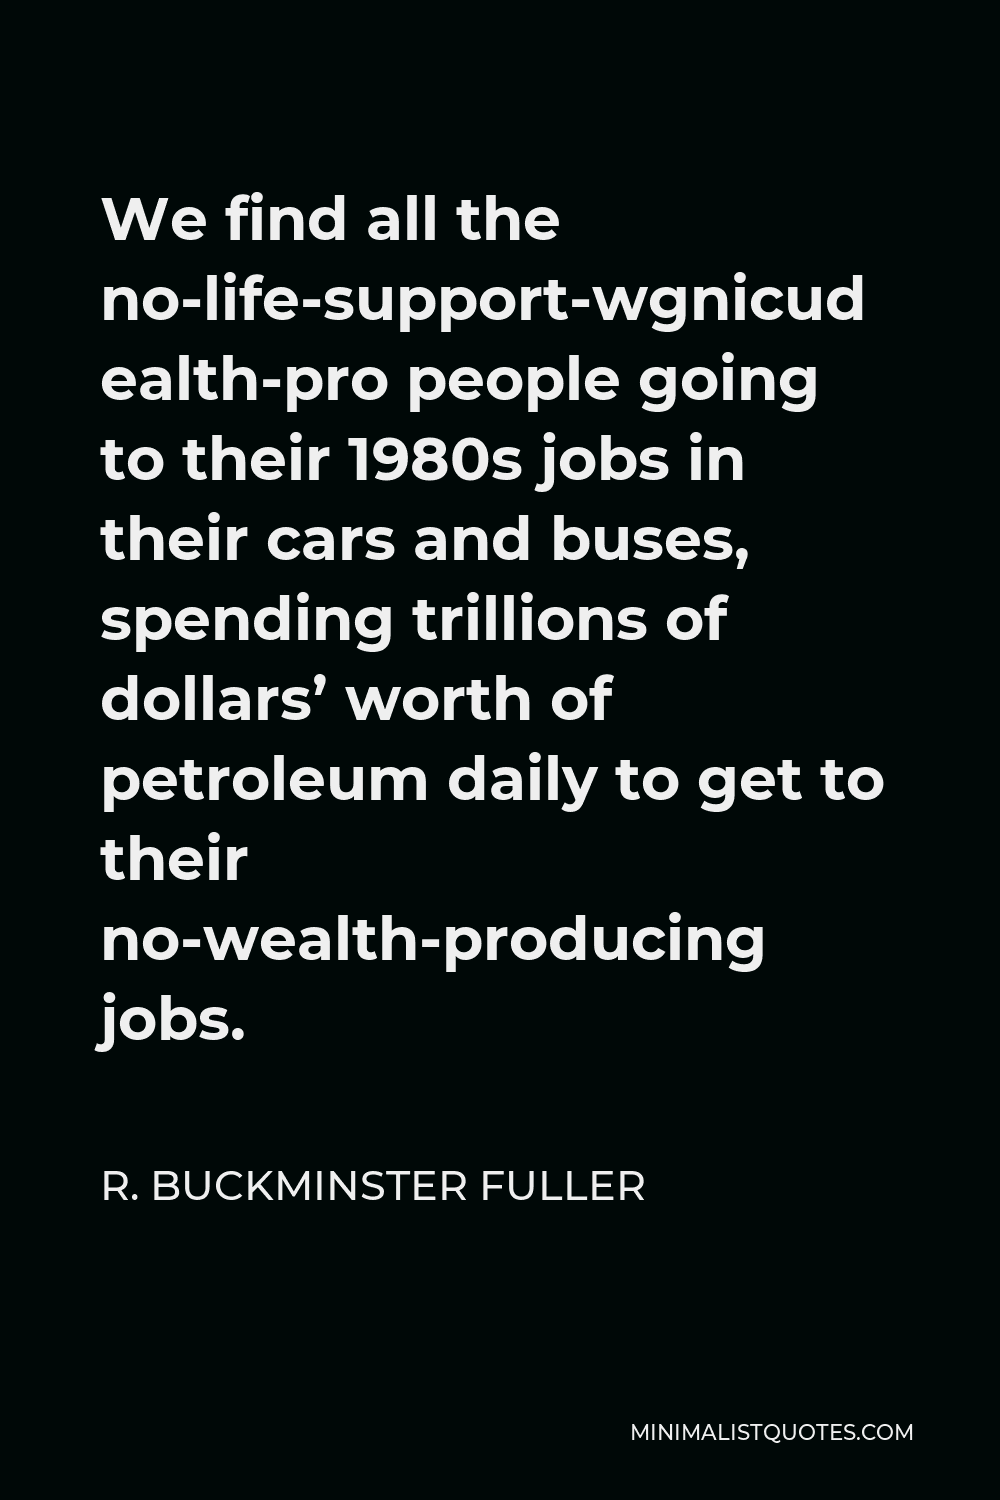 R. Buckminster Fuller Quote - We find all the no-life-support-wealth-producing people going to their 1980s jobs in their cars and buses, spending trillions of dollars’ worth of petroleum daily to get to their no-wealth-producing jobs.